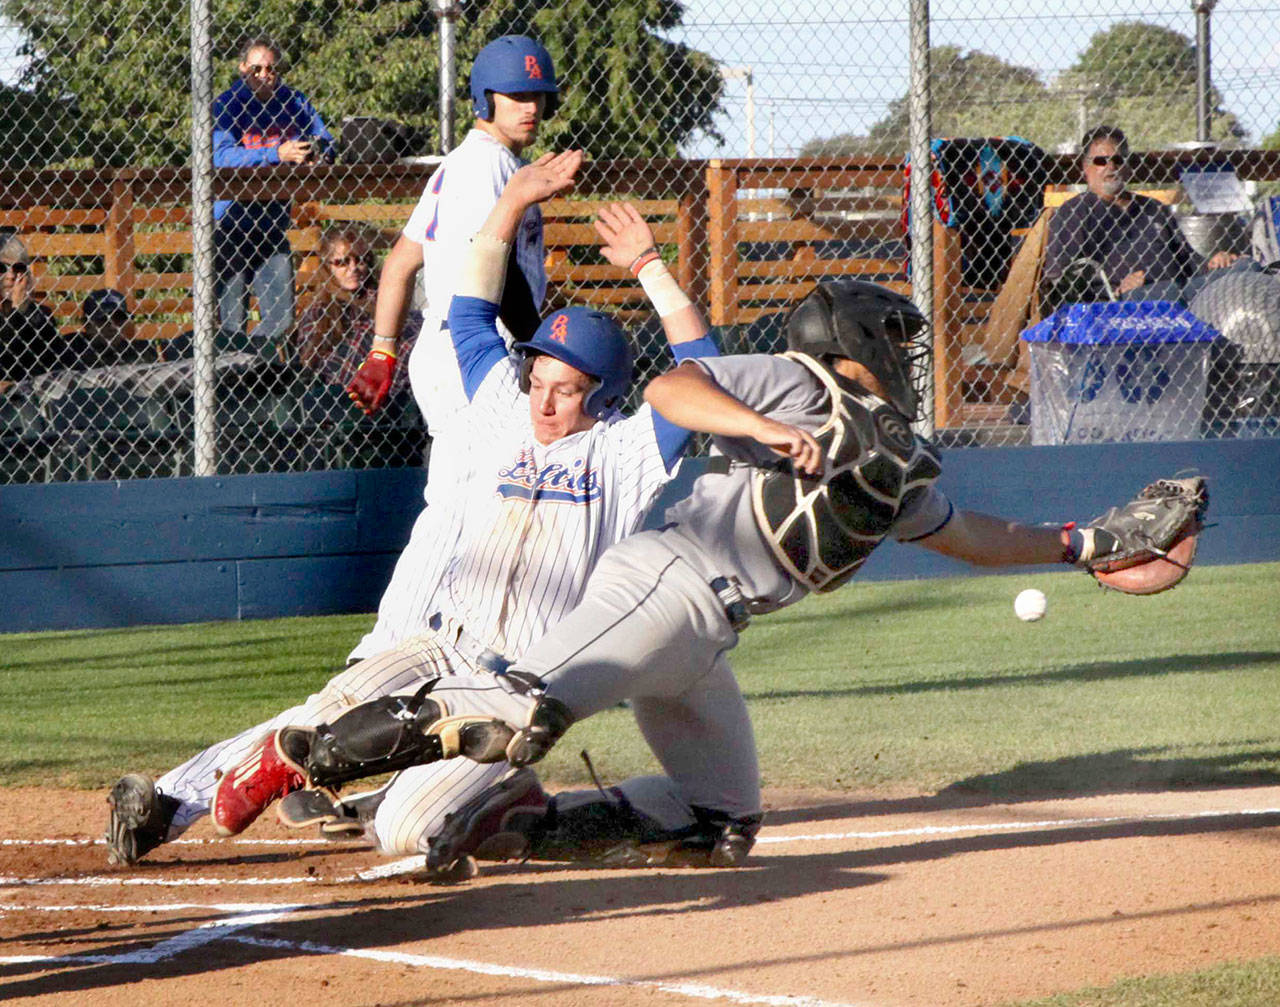 The Lefties’ Justin VanDebrake slides safely into home as the Falcon catcher Josh Figueroa can’t catch the off-line throw to the plate by second baseman Tylor Nixon in the first inning during a double steal. The Lefties went on to win 5-4. (Dave Logan/for Peninsula Daily News)